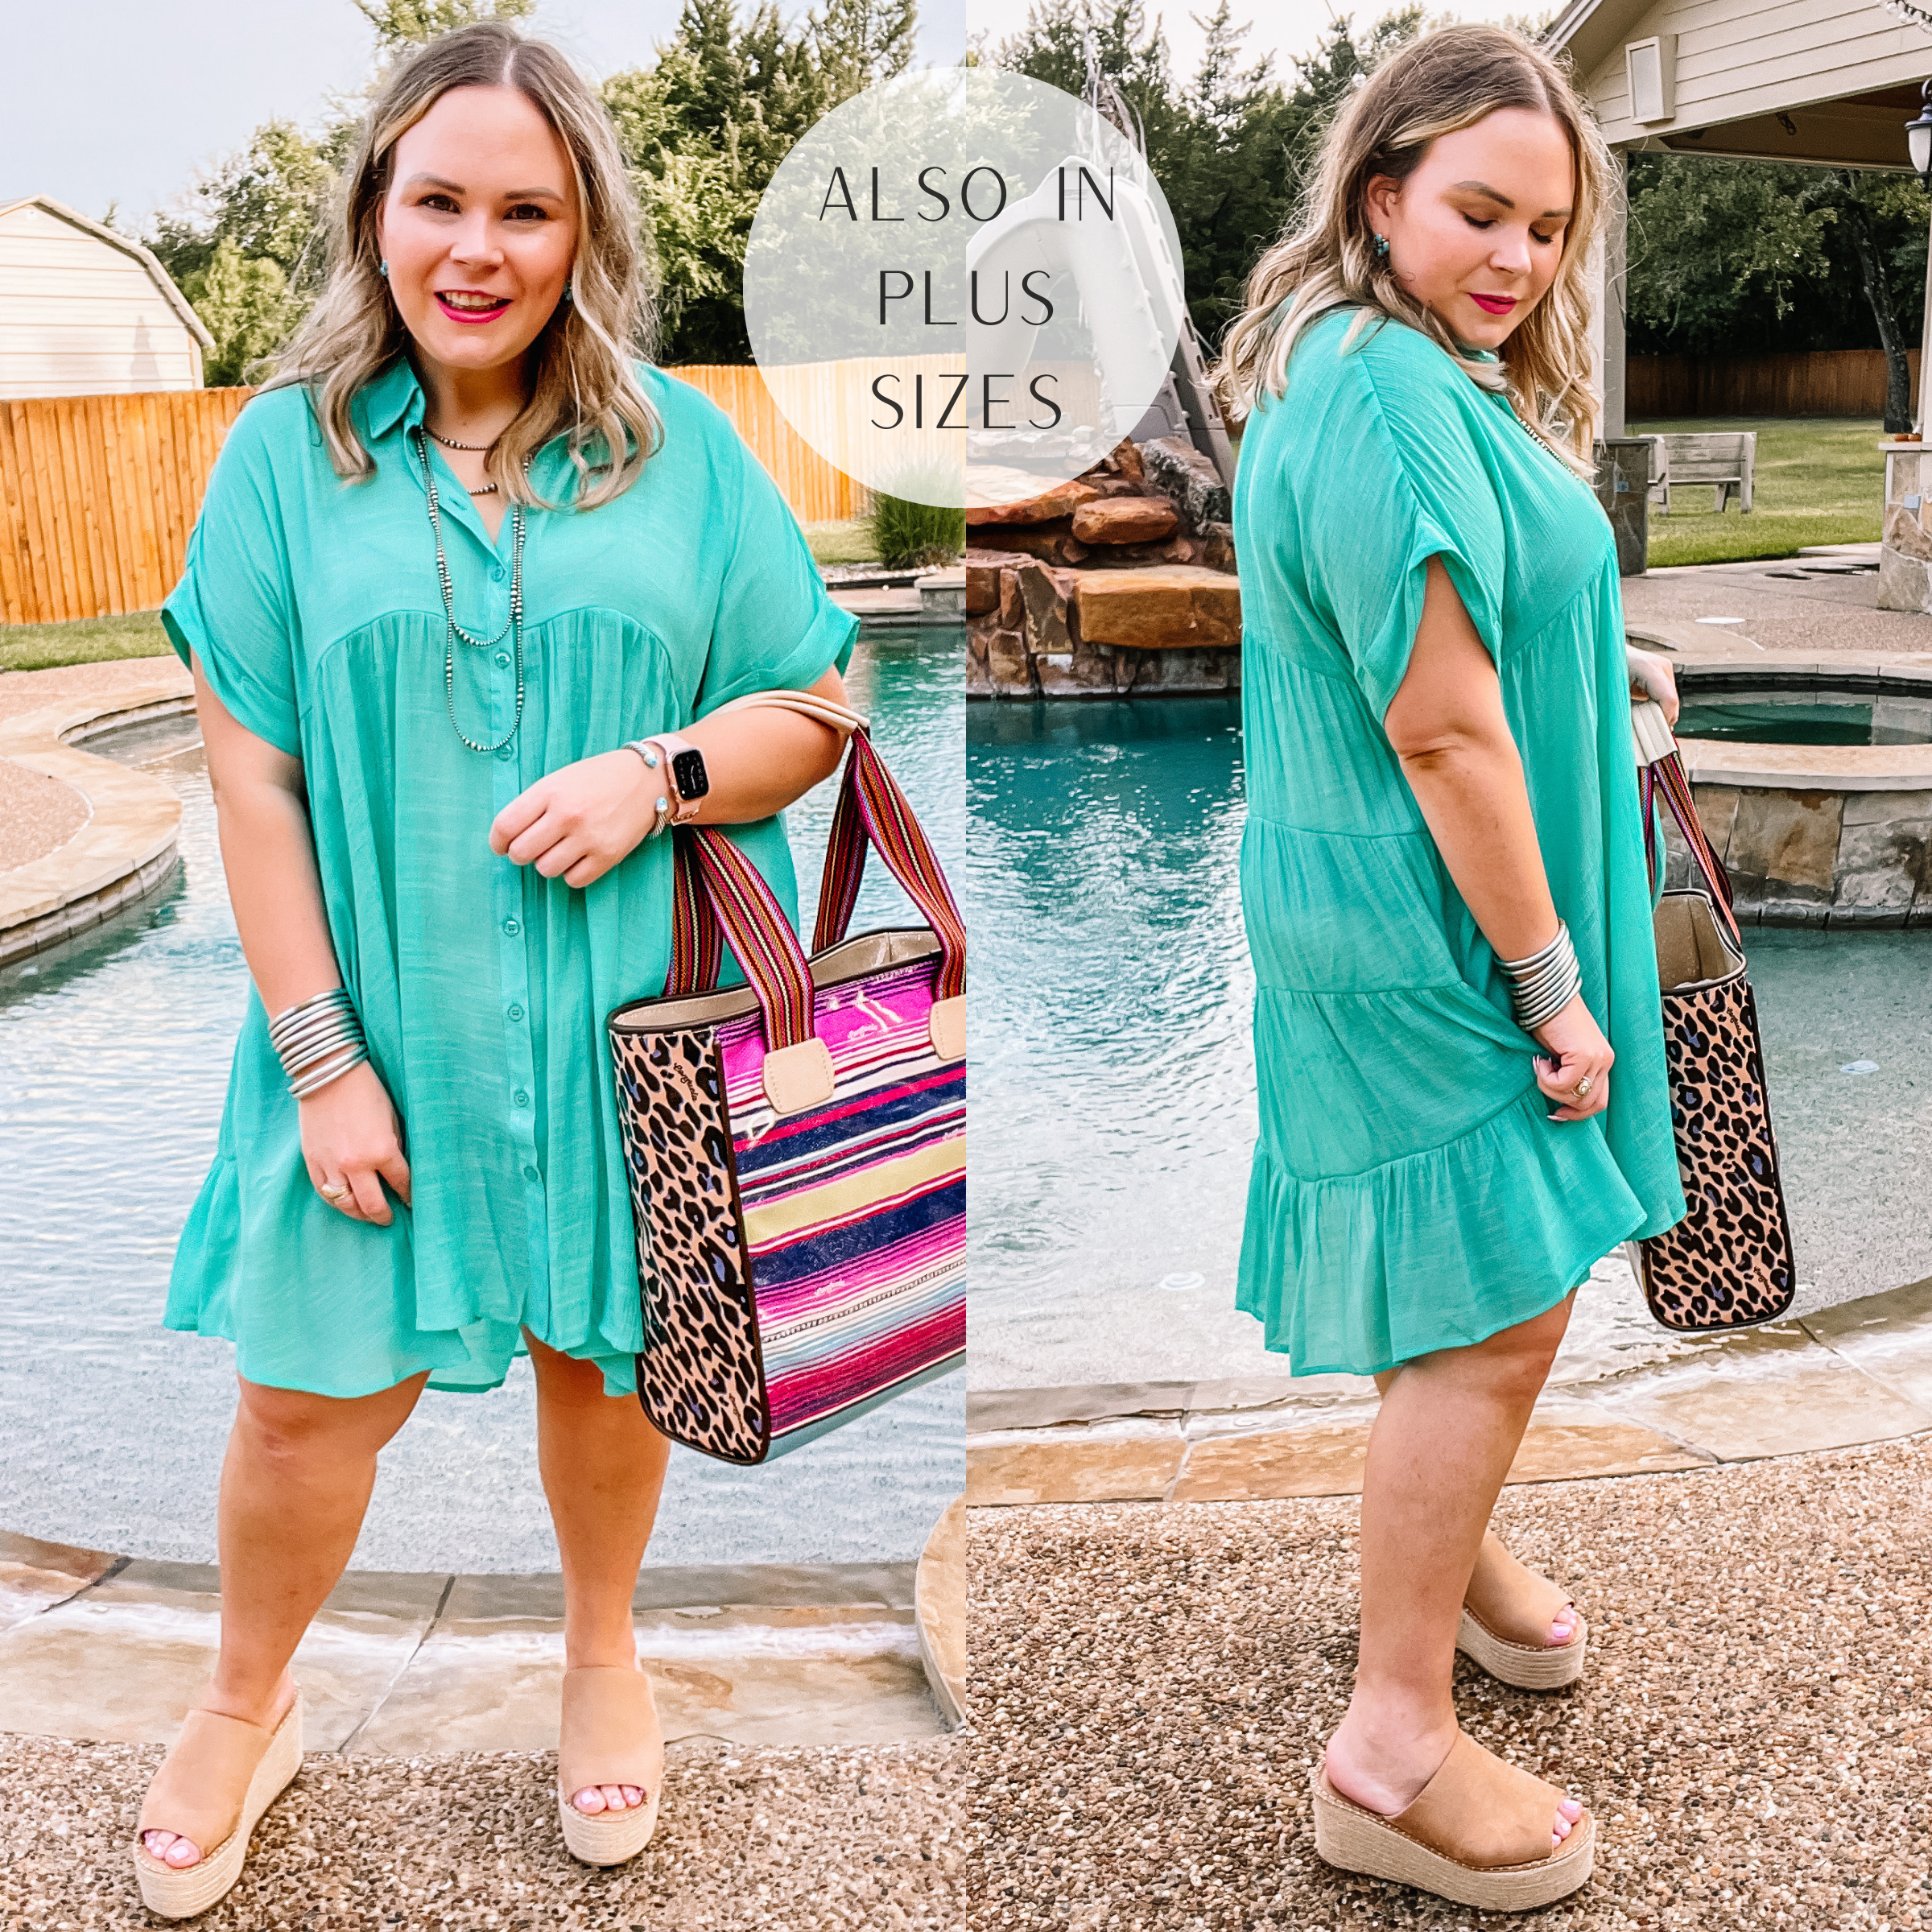 Model is wearing a turquoise blue short sleeve button up dress. Model has it paired with tan wedges, a colorful bag, and silver jewelry.